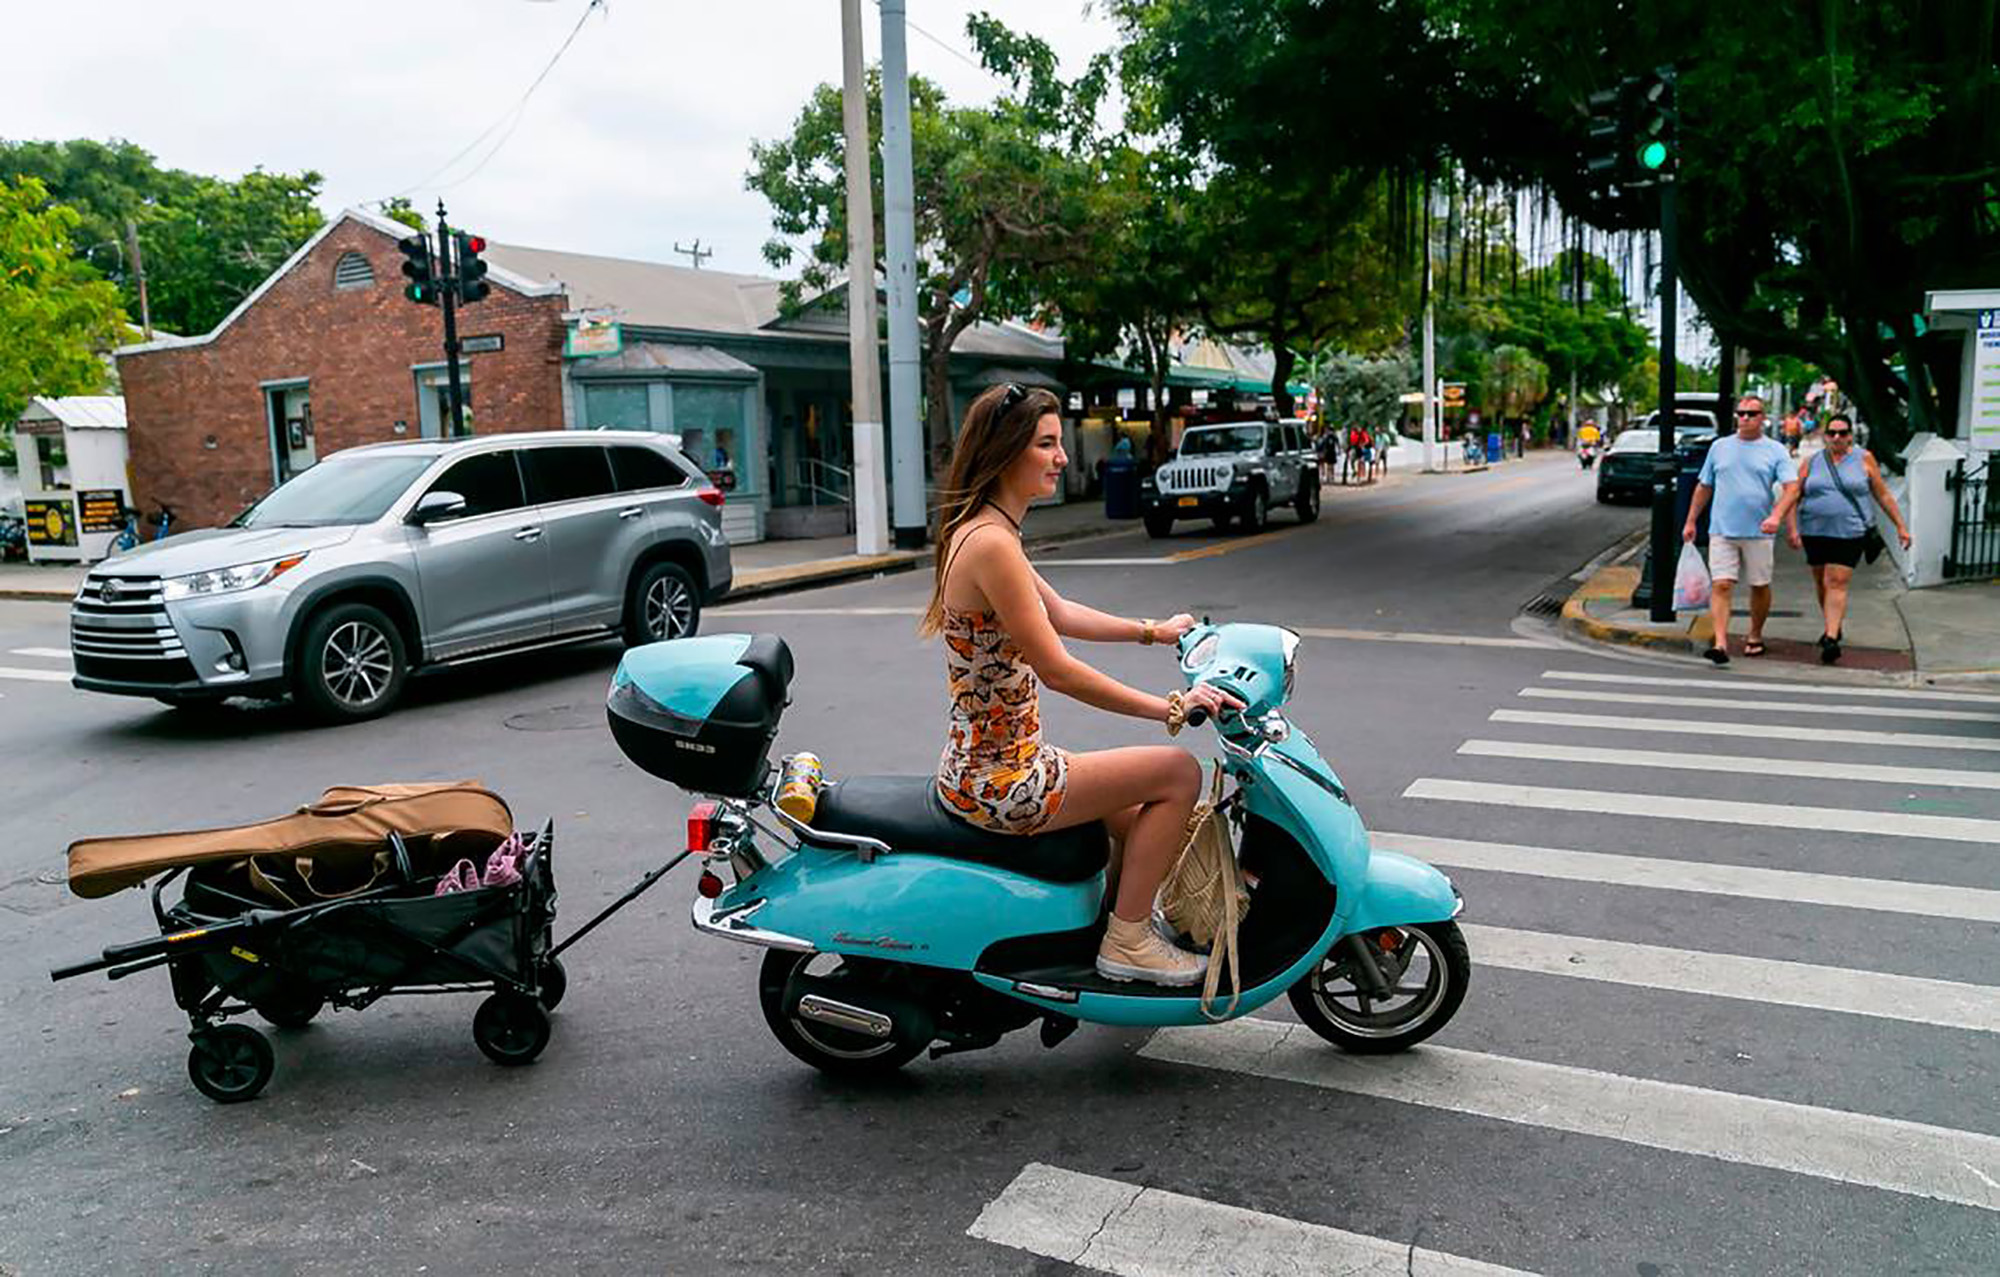 Singer Elle Haley rides a scooter with her music equipment in Key West, Florida